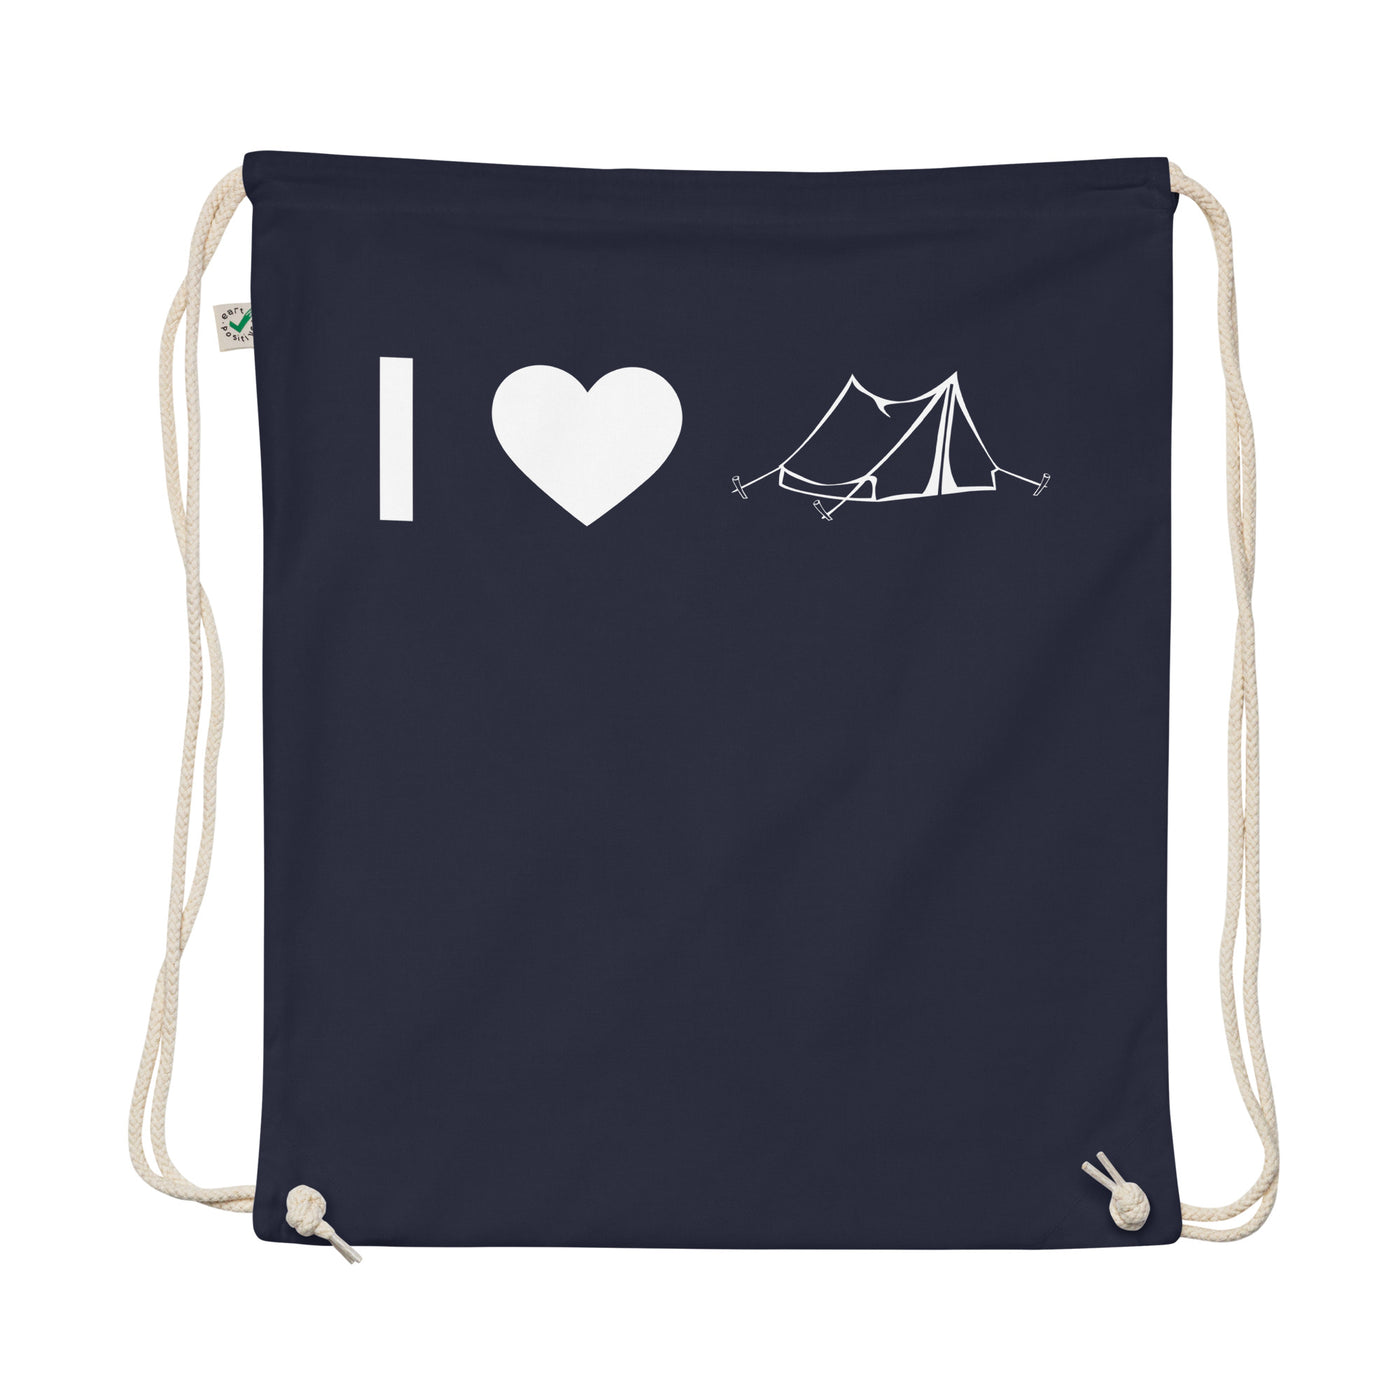 I Heart And Camping Tent - Organic Turnbeutel camping